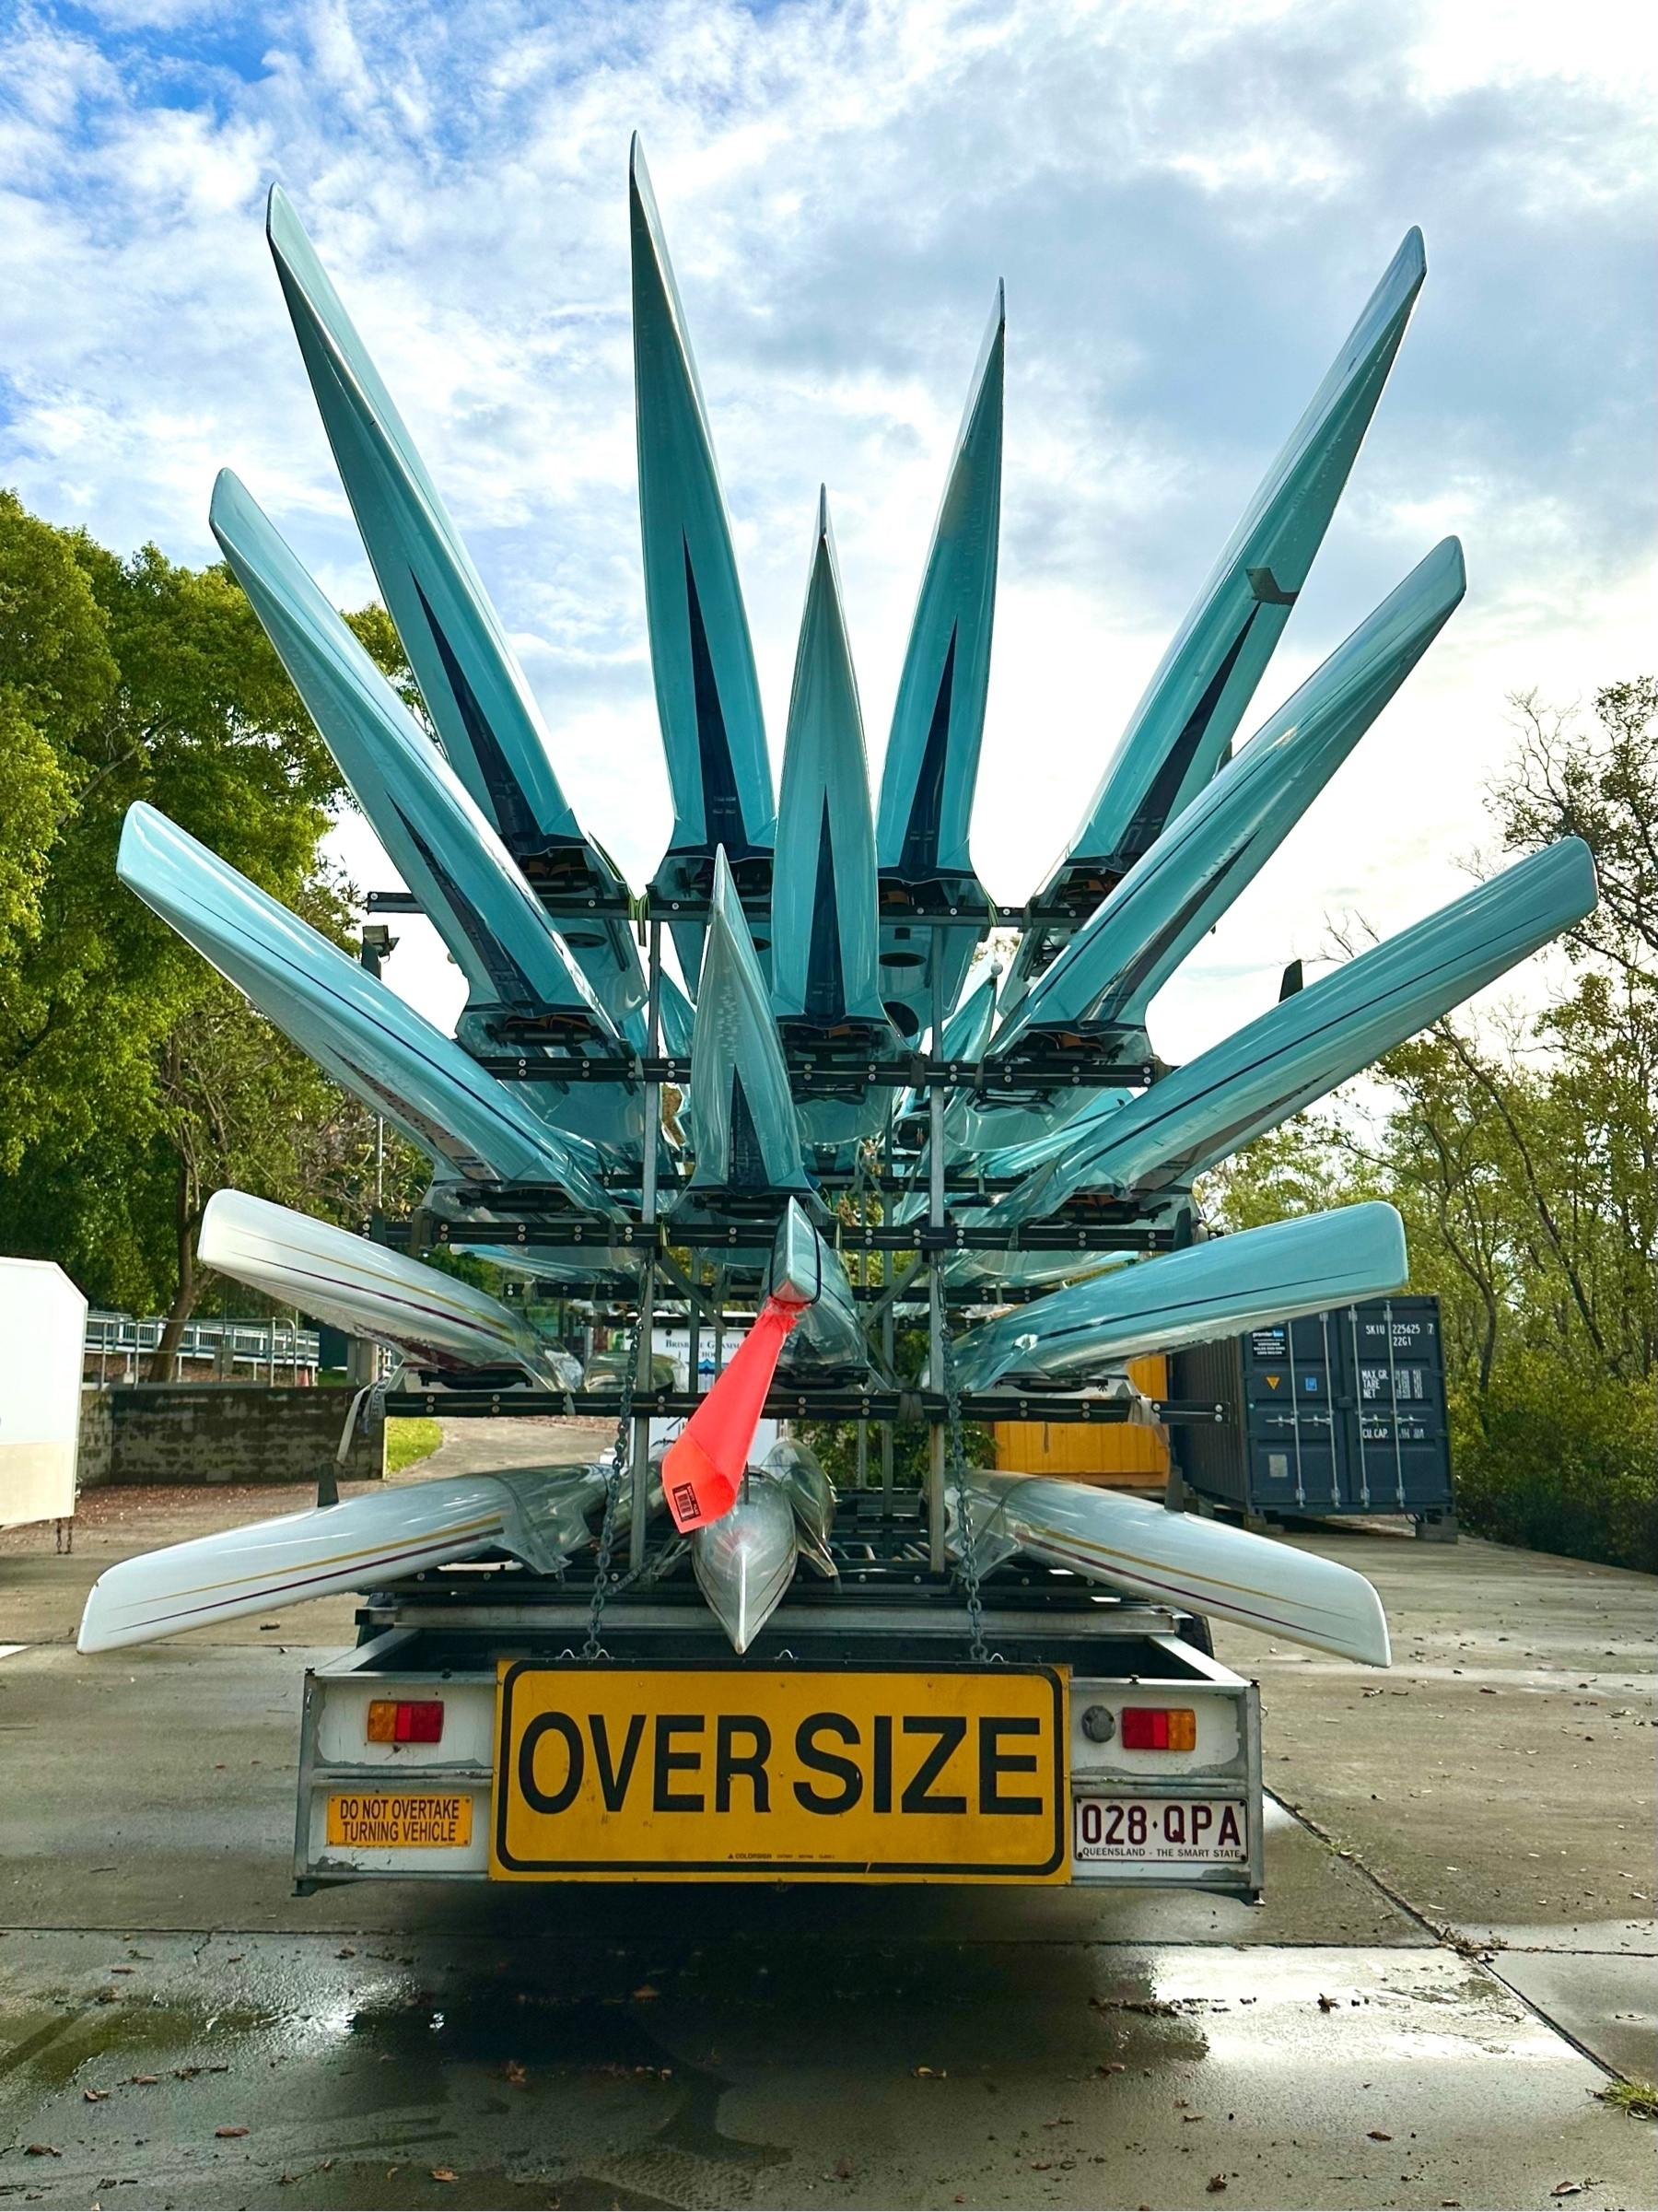 The rear of a trailer holding 16 rowing sculls. The photo is taken at an angle so the ends appear like spikes pointing skyward.